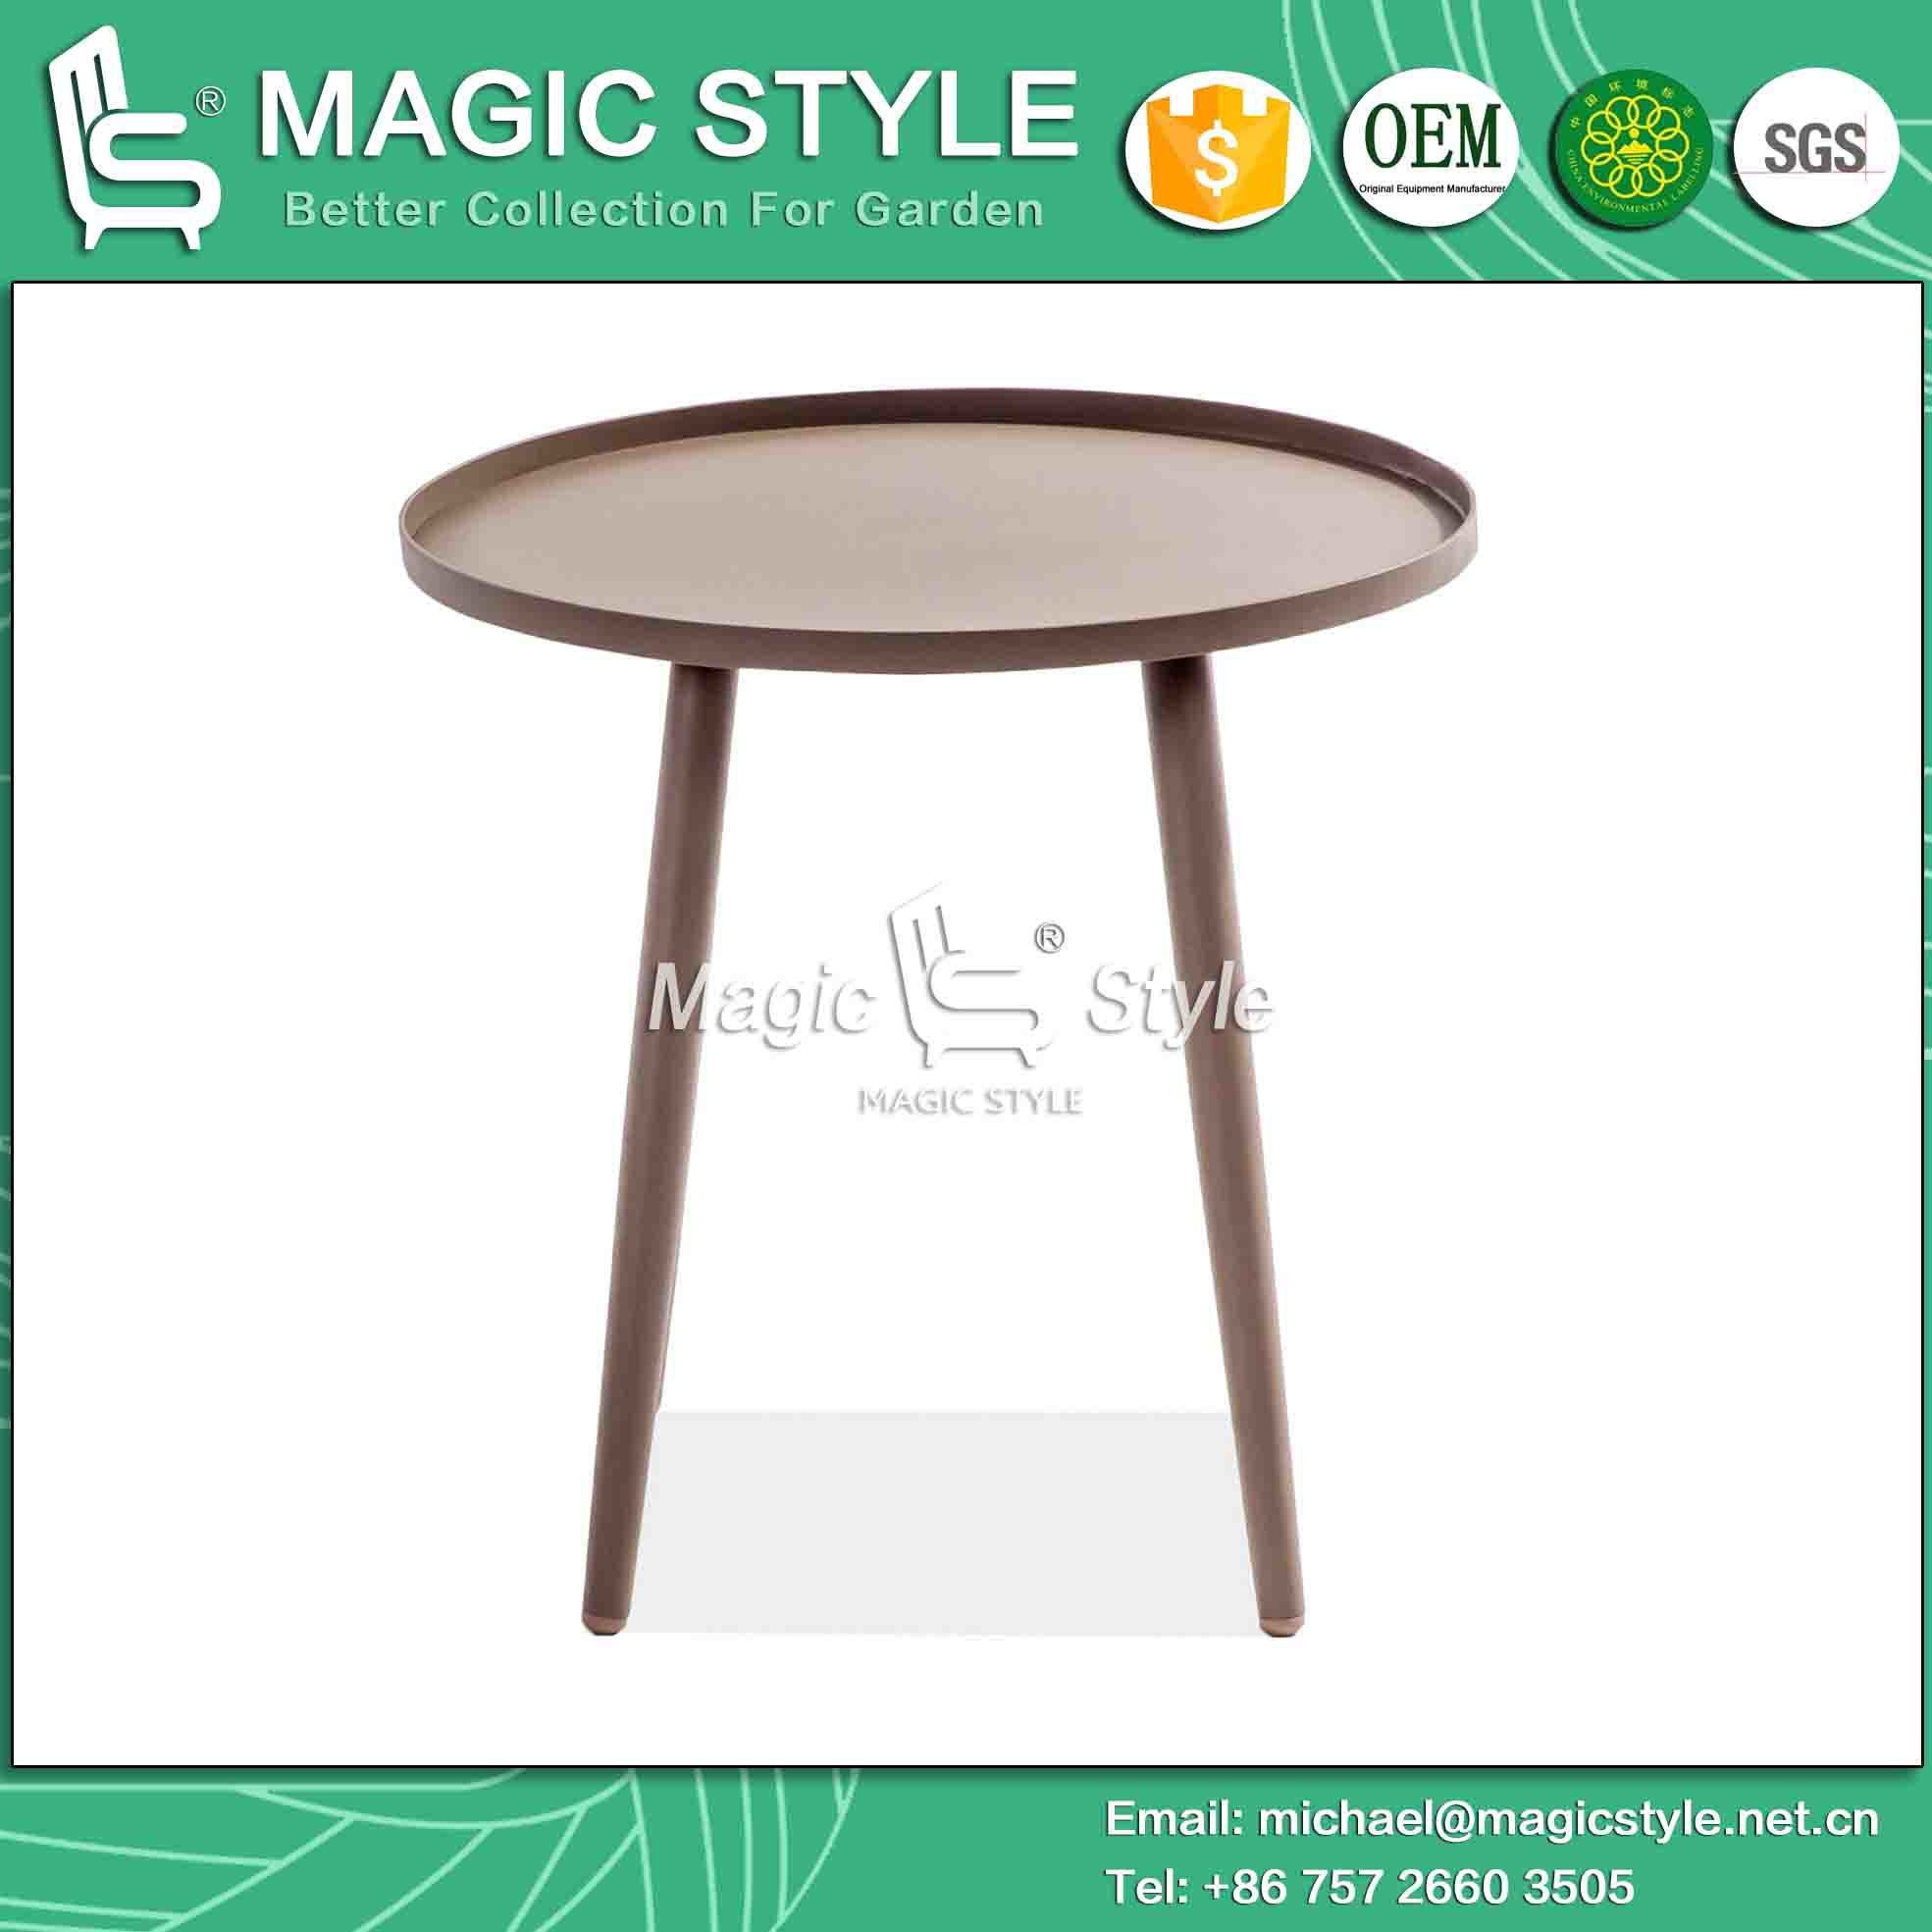 Outdoor Modern Coffee Table Outdoor Kd Table (Magic Style)